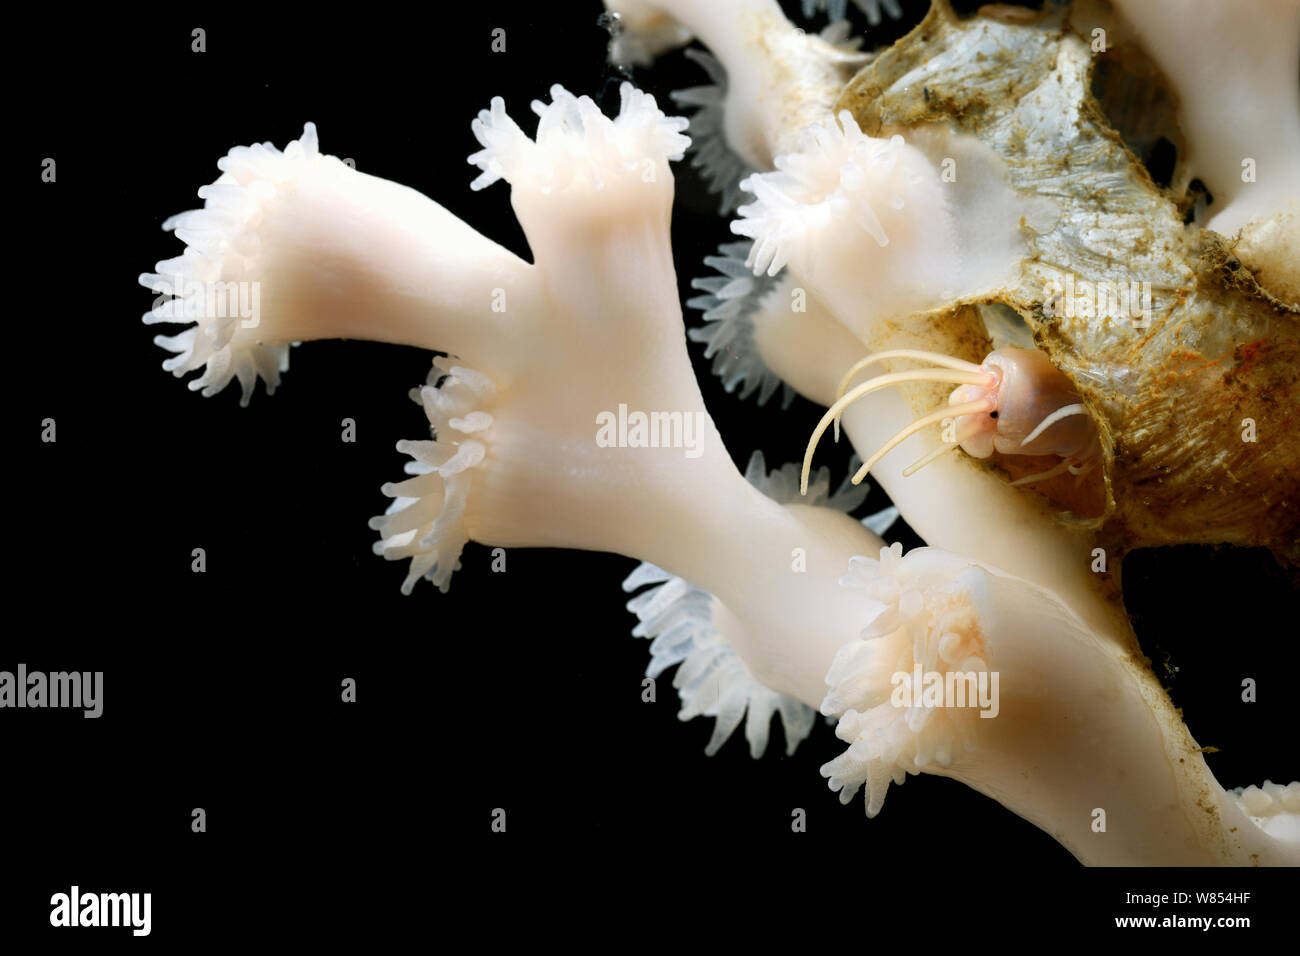 Polychaete worm (Eunice norvegica)  calcifies over its parchment tubes of Lopheia pertusa adding strength to the coral skeleton and providing protection to the worm,  from Trondheimfjord, North Atlantic Ocean, Norway. Controlled conditions. . Photo taken in cooperation with GEOMAR coldwater coral research project Stock Photo